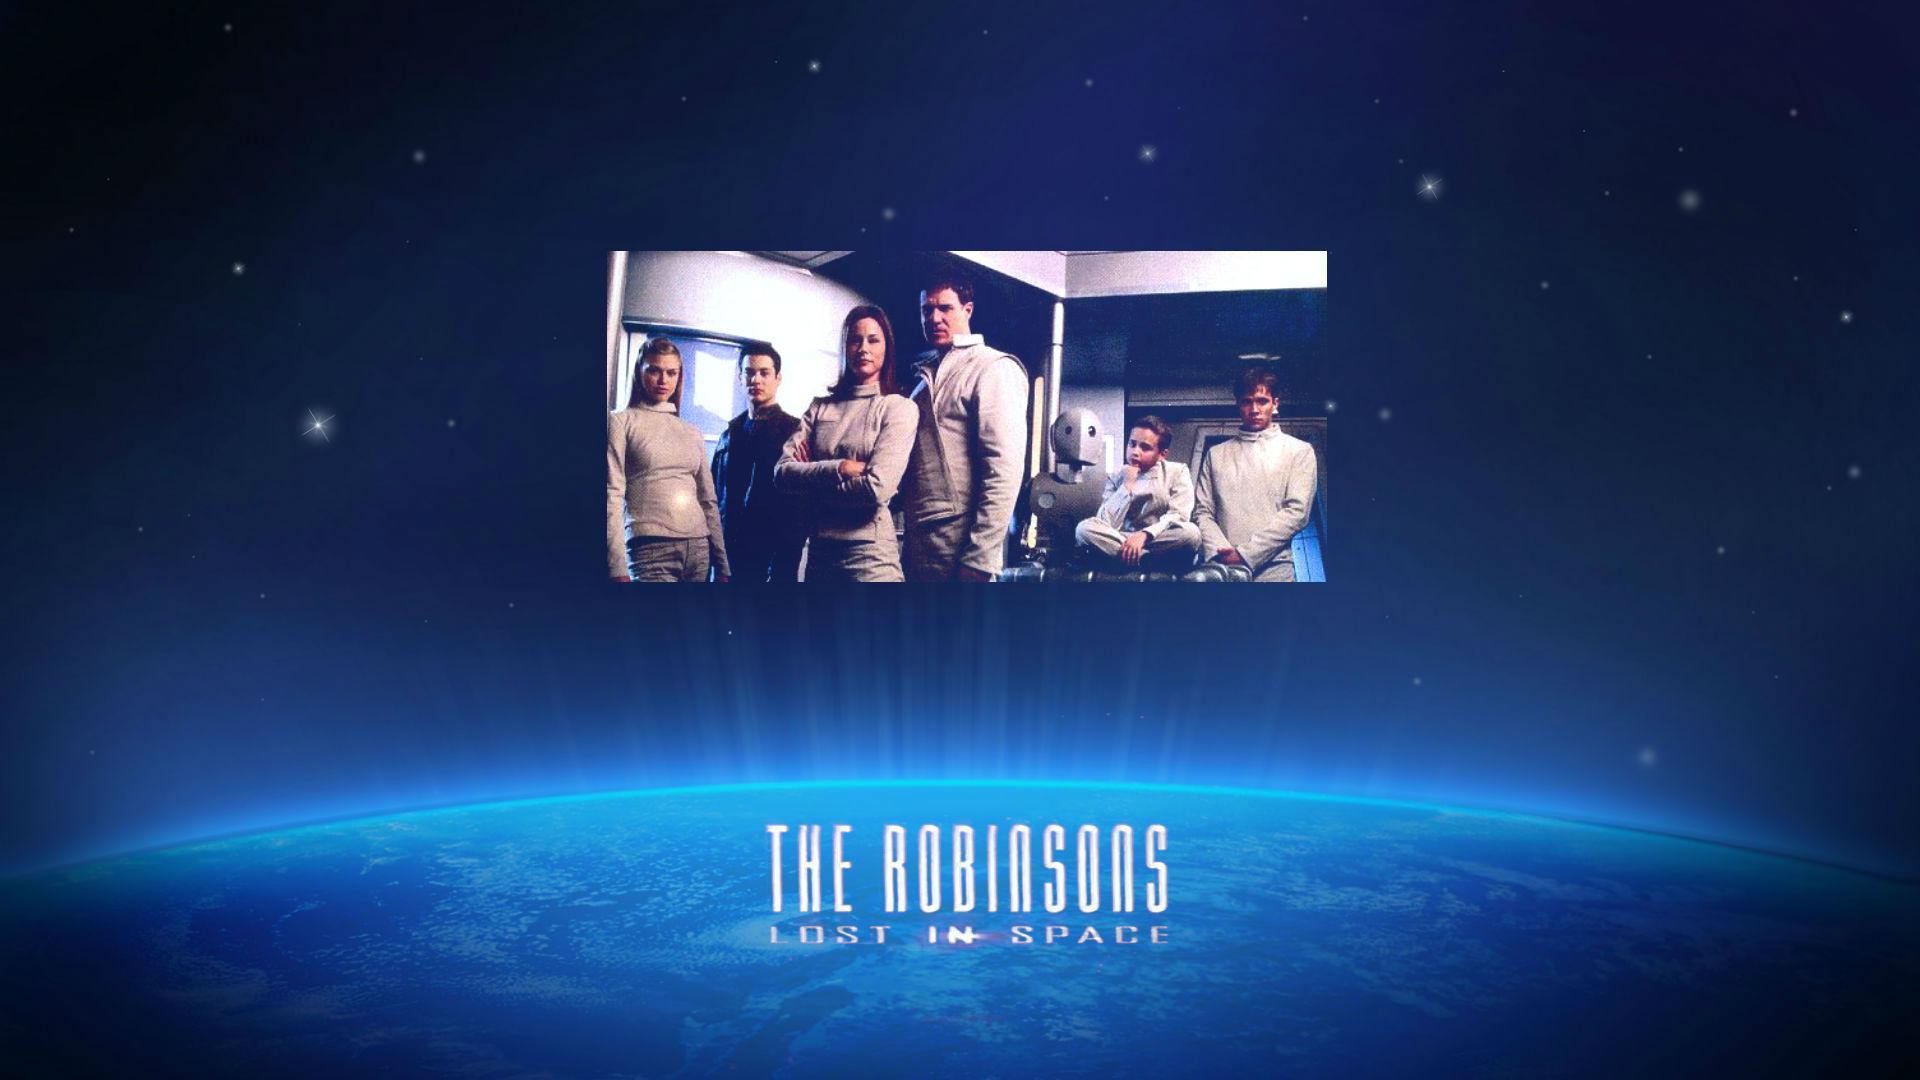 The Robinsons: Lost in Space